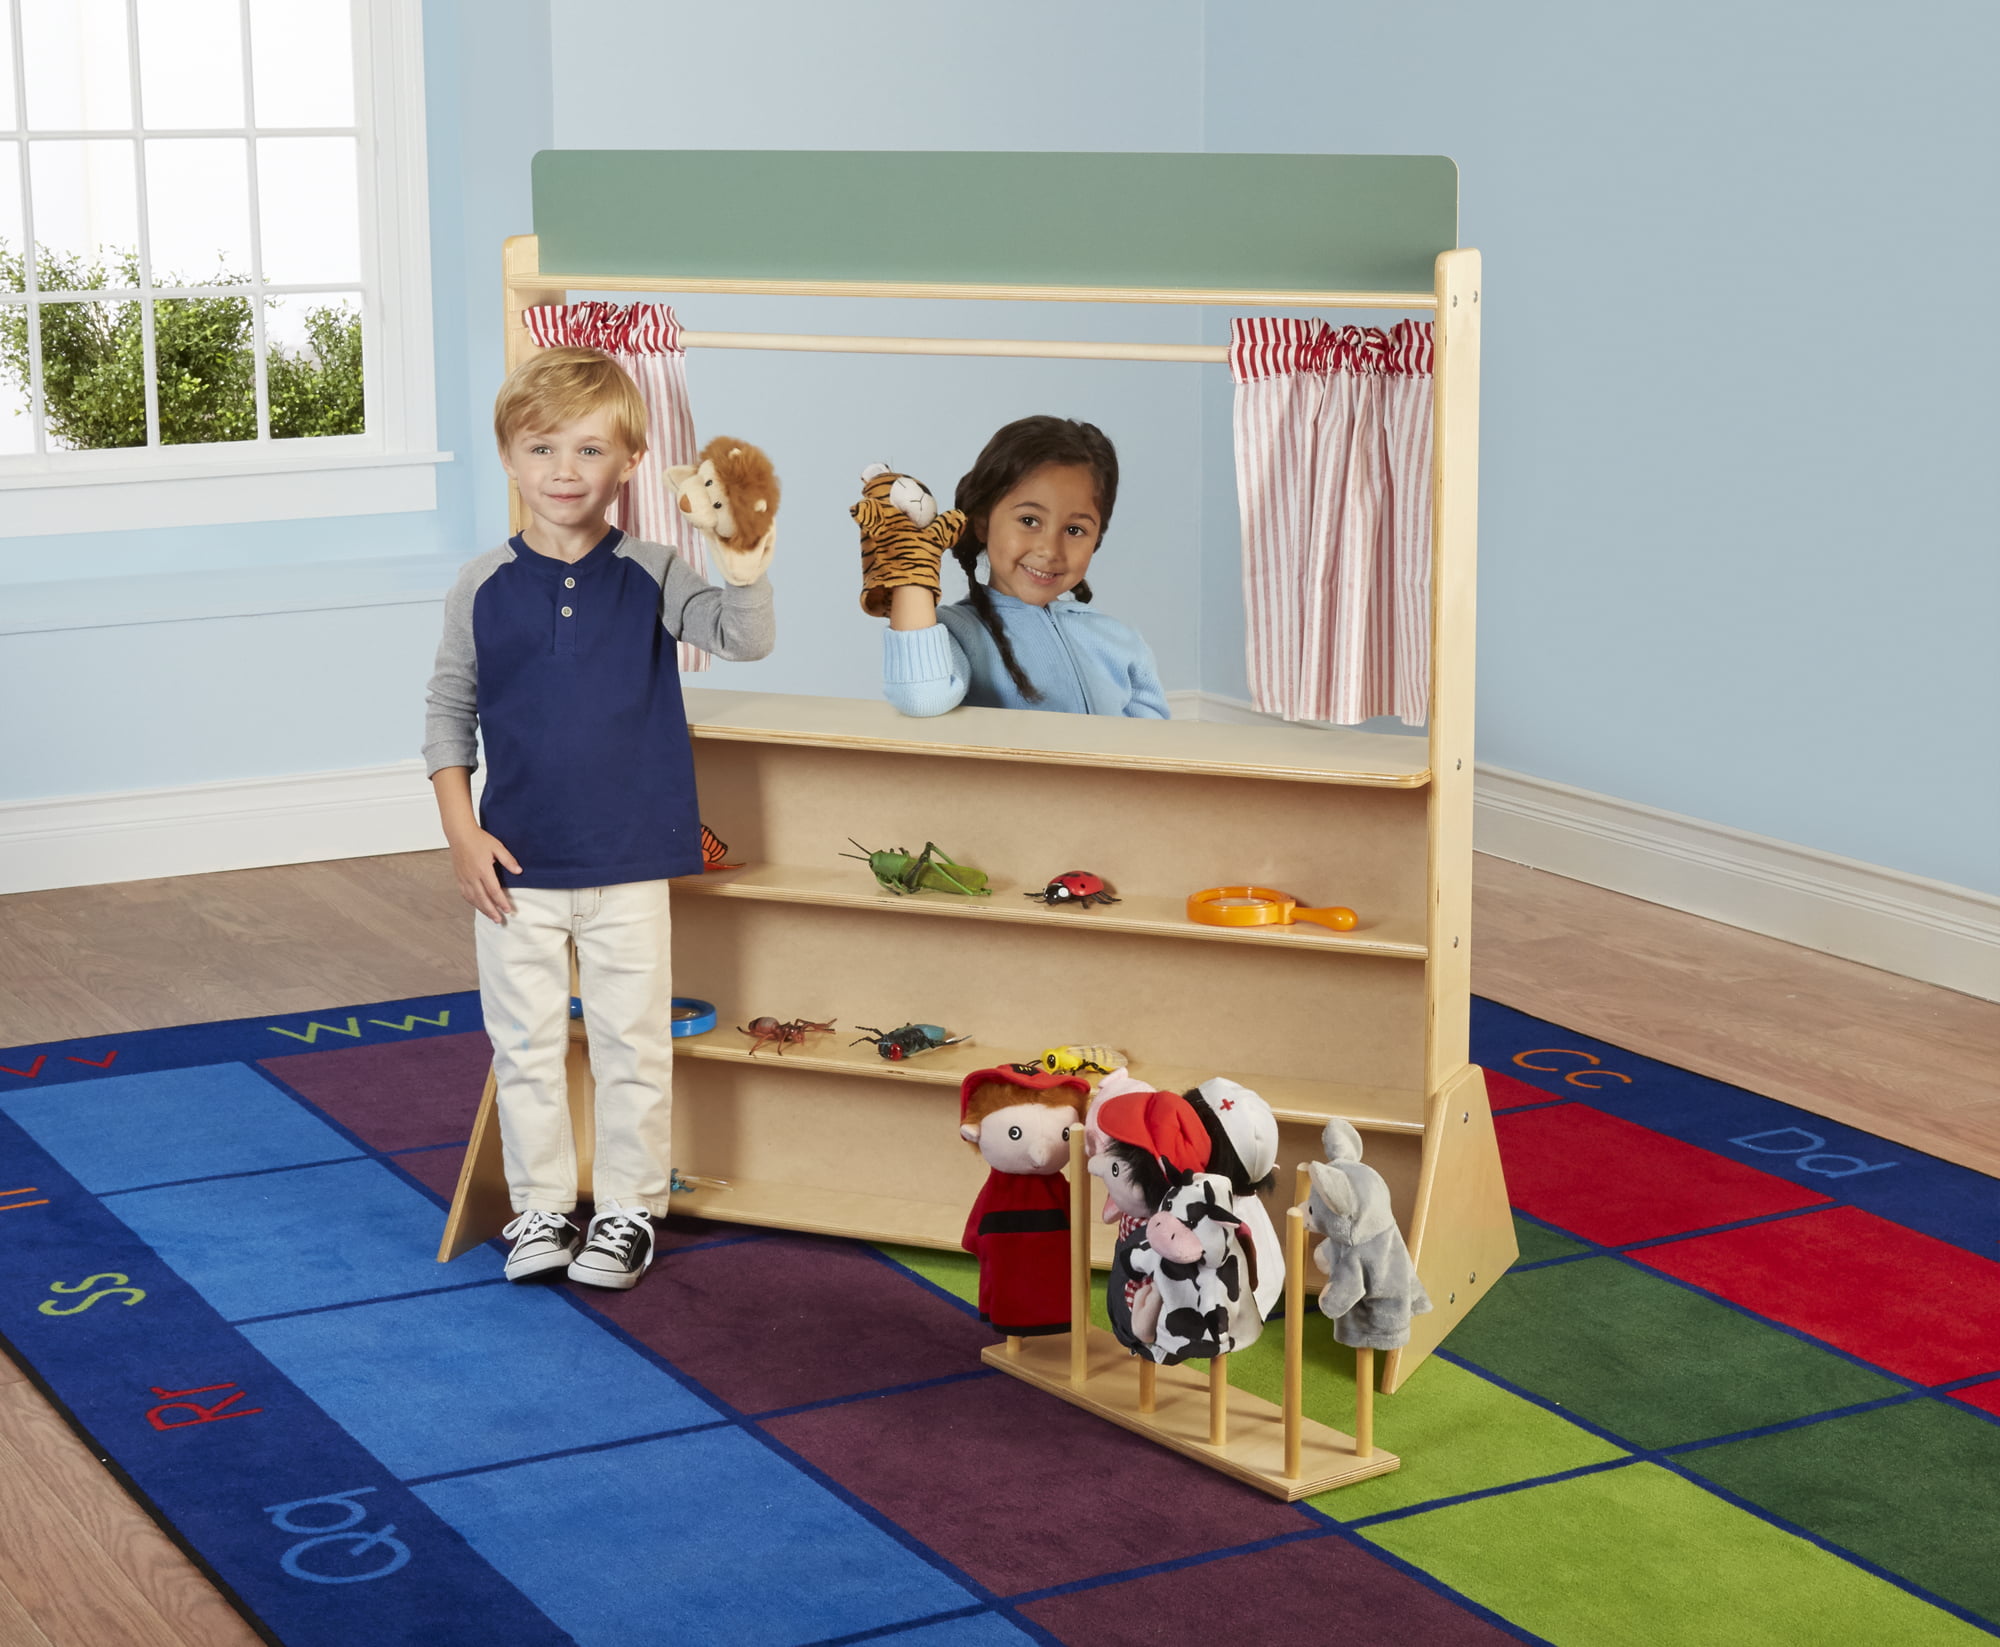 Childcraft Deluxe Play Store and Puppet Theatre, 47-3/4 x 14-1/2 x 49